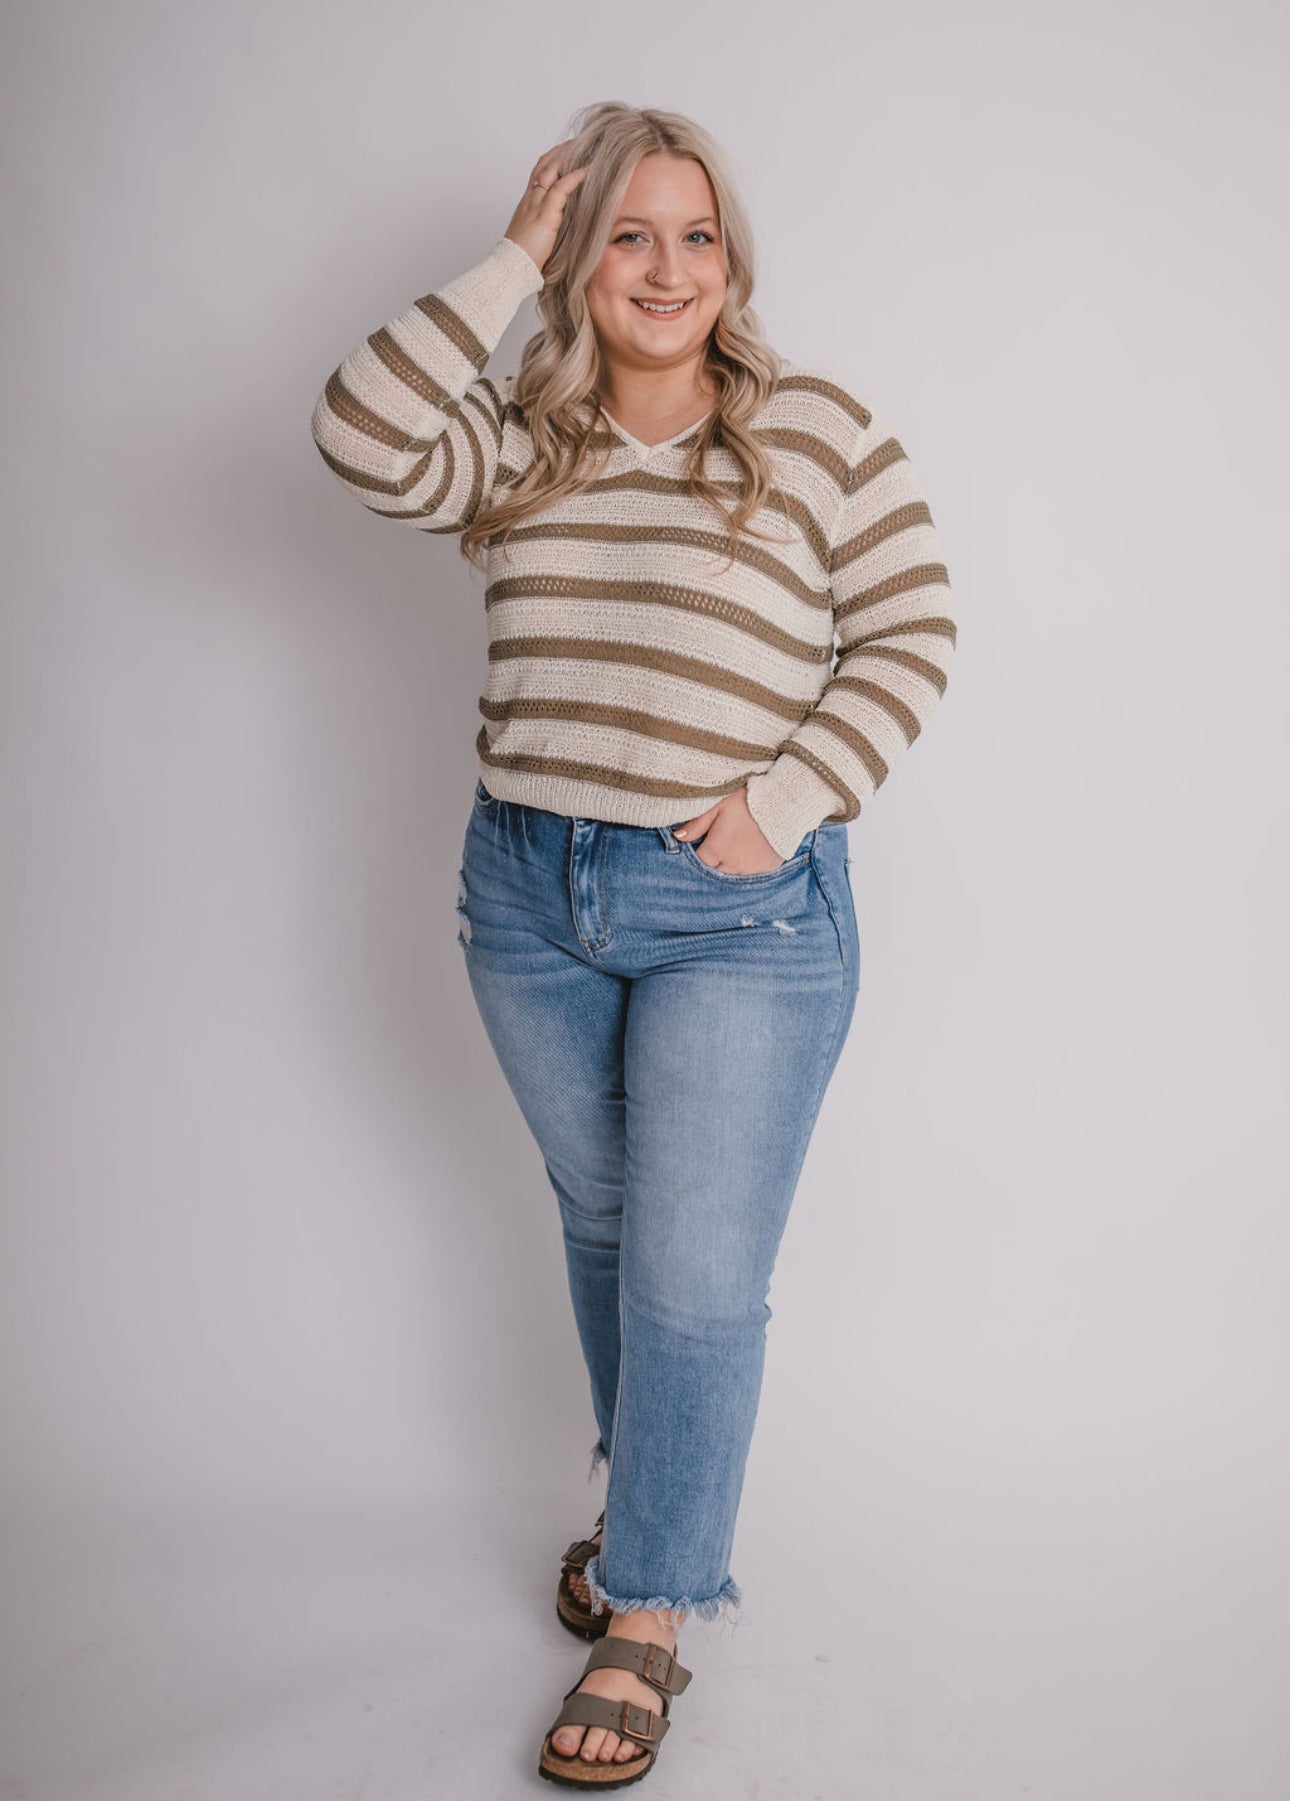 The Striped Lightweight Sweater Top